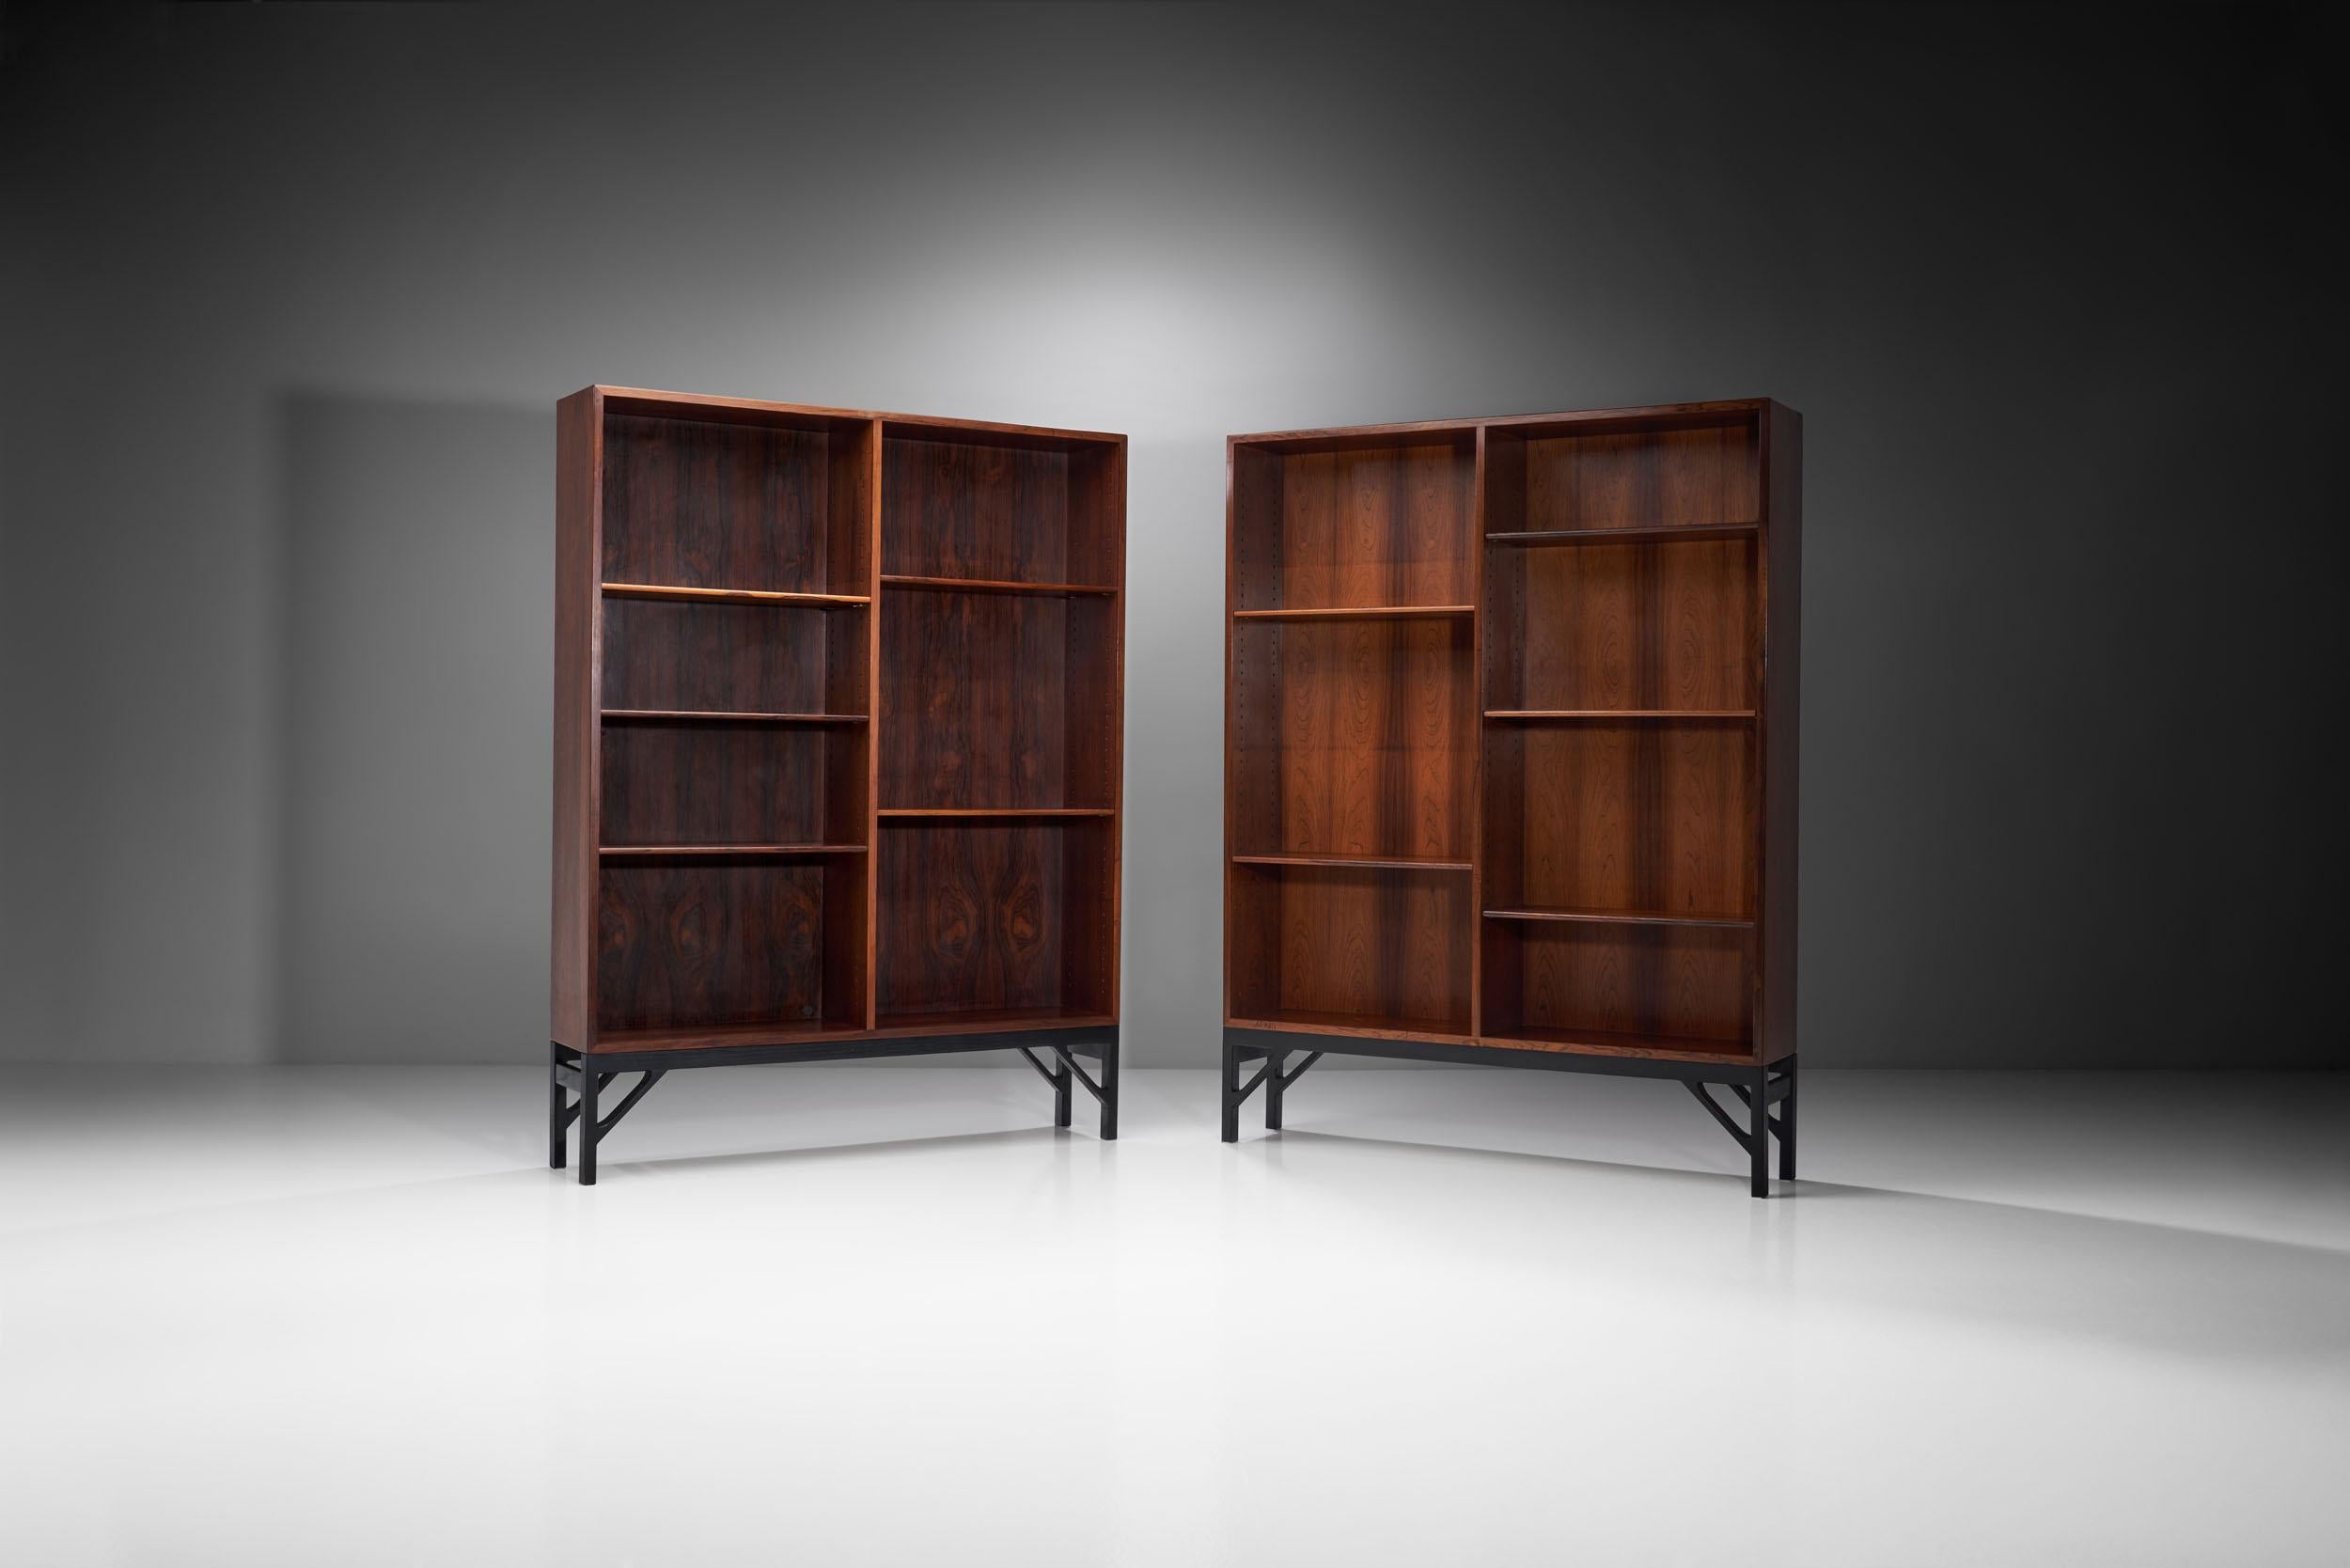 These impressive bookcases designed by Børge Mogensen reflect the Danish designer’s aesthetic that was clean and highly functional, creating pieces that stand out despite their restrained design.

The pair is made of solid wood with a beautiful